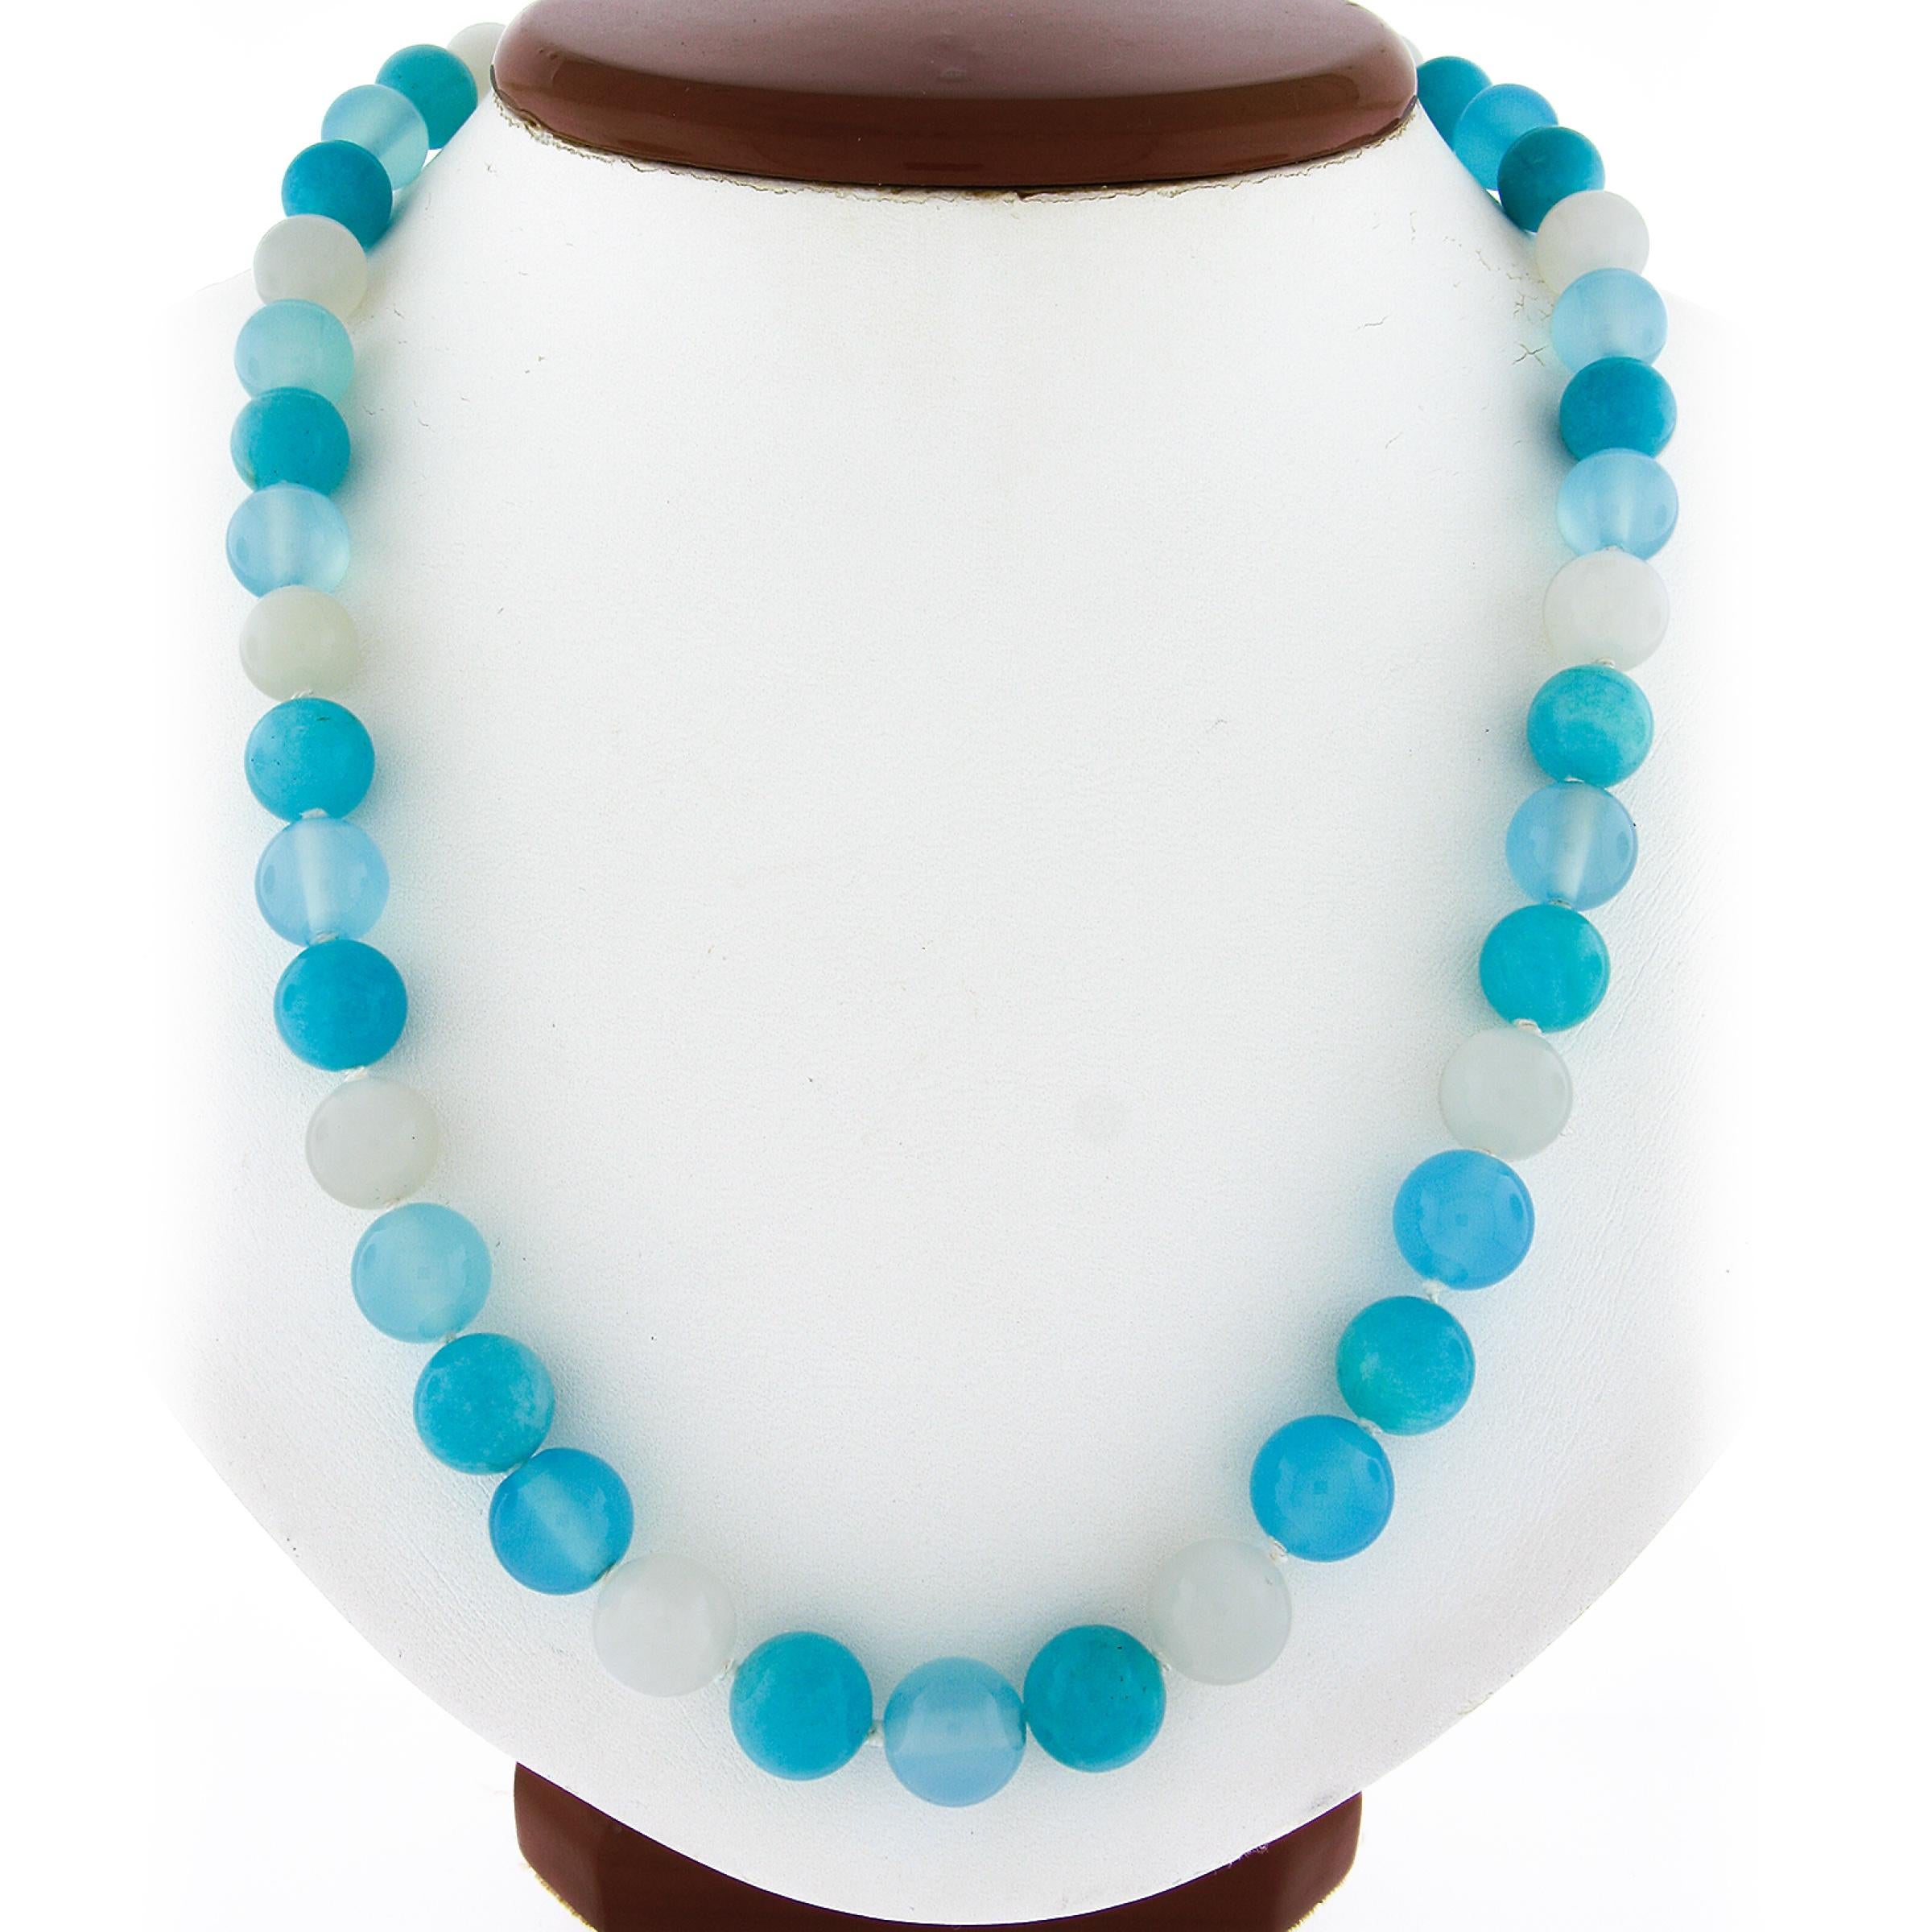 Item Details (Necklace)
--Stones:--
50 Natural Genuine Amazonite & Chalcedony - Bead Shape- Turquoise, Sky Blue & White Color - 10.2mm (approx.)

Material: String w/ Solid Sterling Silver Clasp
Weight: 69.9 Grams
Length: 22 Wearable Inches
Clasp: